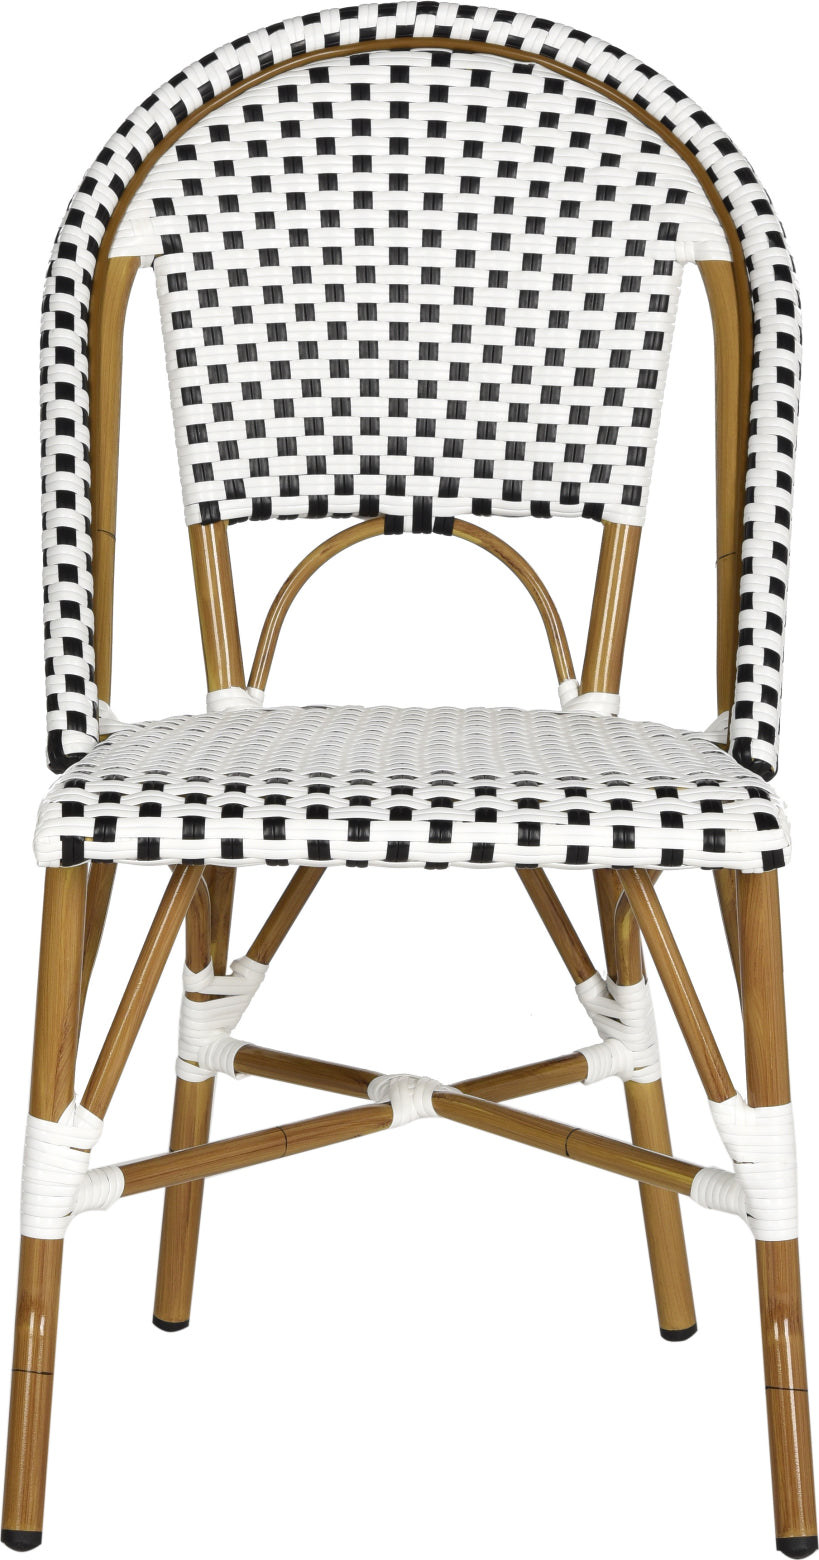 Safavieh Salcha Indoor-Outdoor French Bistro Stacking Side Chair Black/White/Light Brown Furniture main image